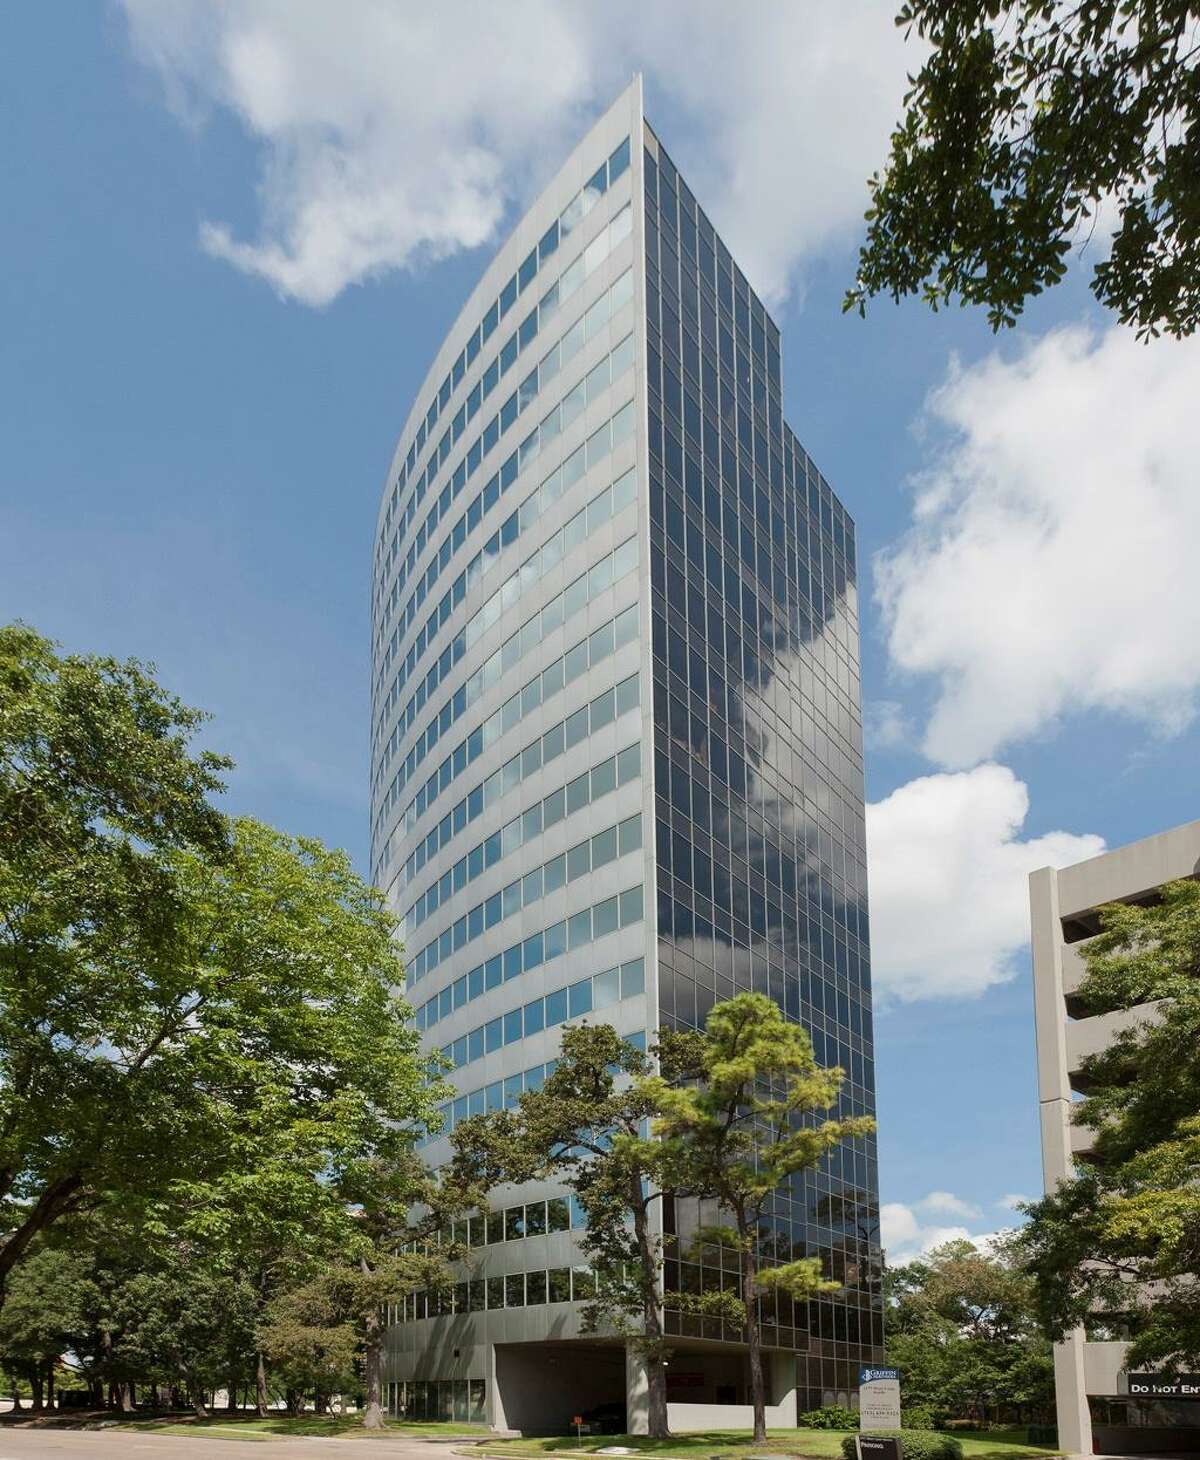 Hicks Ventures and Taconic Capital Advisors plan improvements to 1177 West Loop South. The building was purchased from Dallas-based Spire Realty Group.